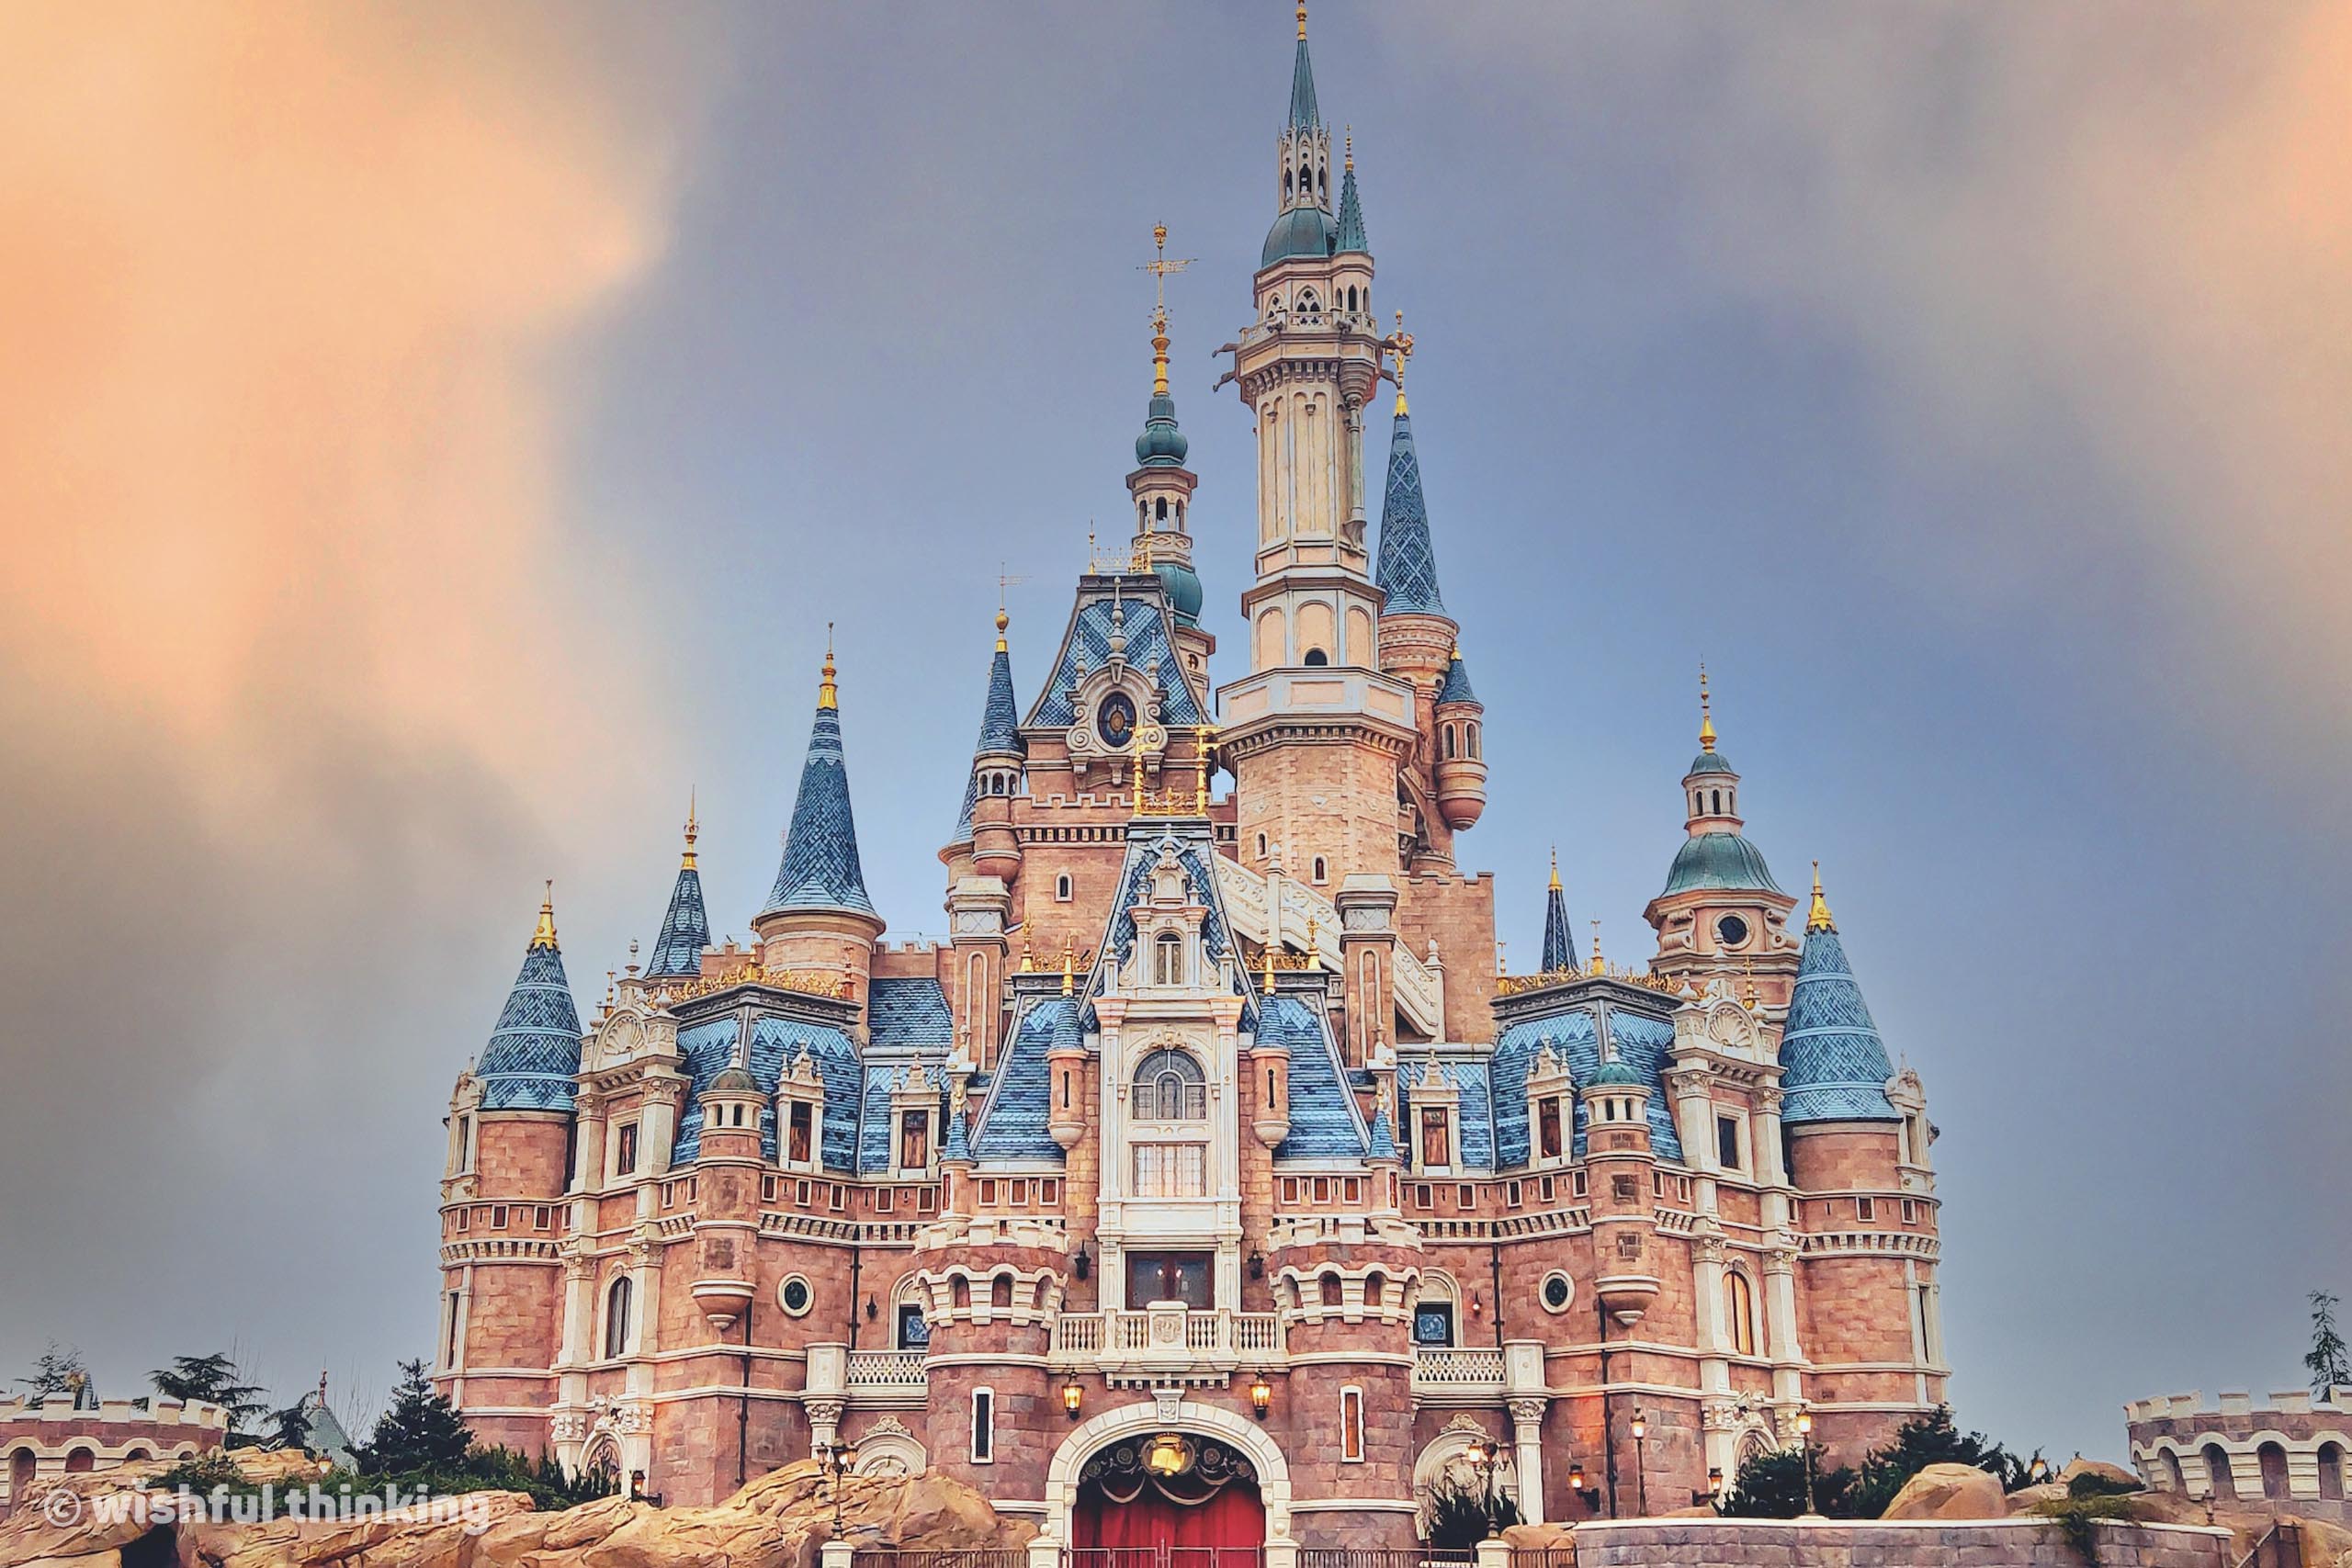 The Enchanted Storybook Castle at Shanghai Disneyland glows with late sunset pink hues in Shanghai, People's Republic of China